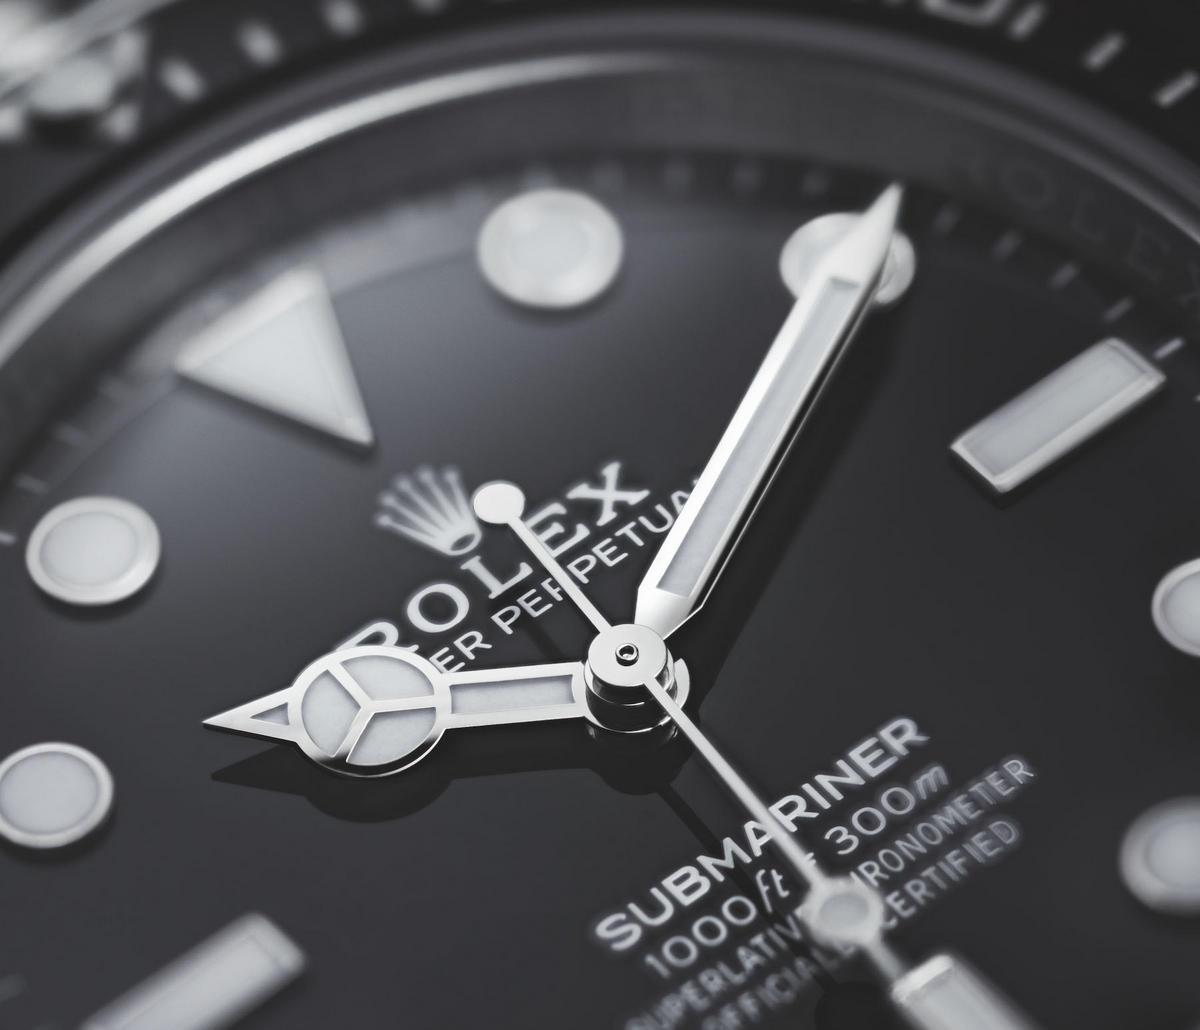 Here is everything you need to know about the 2020 Rolex Submariner